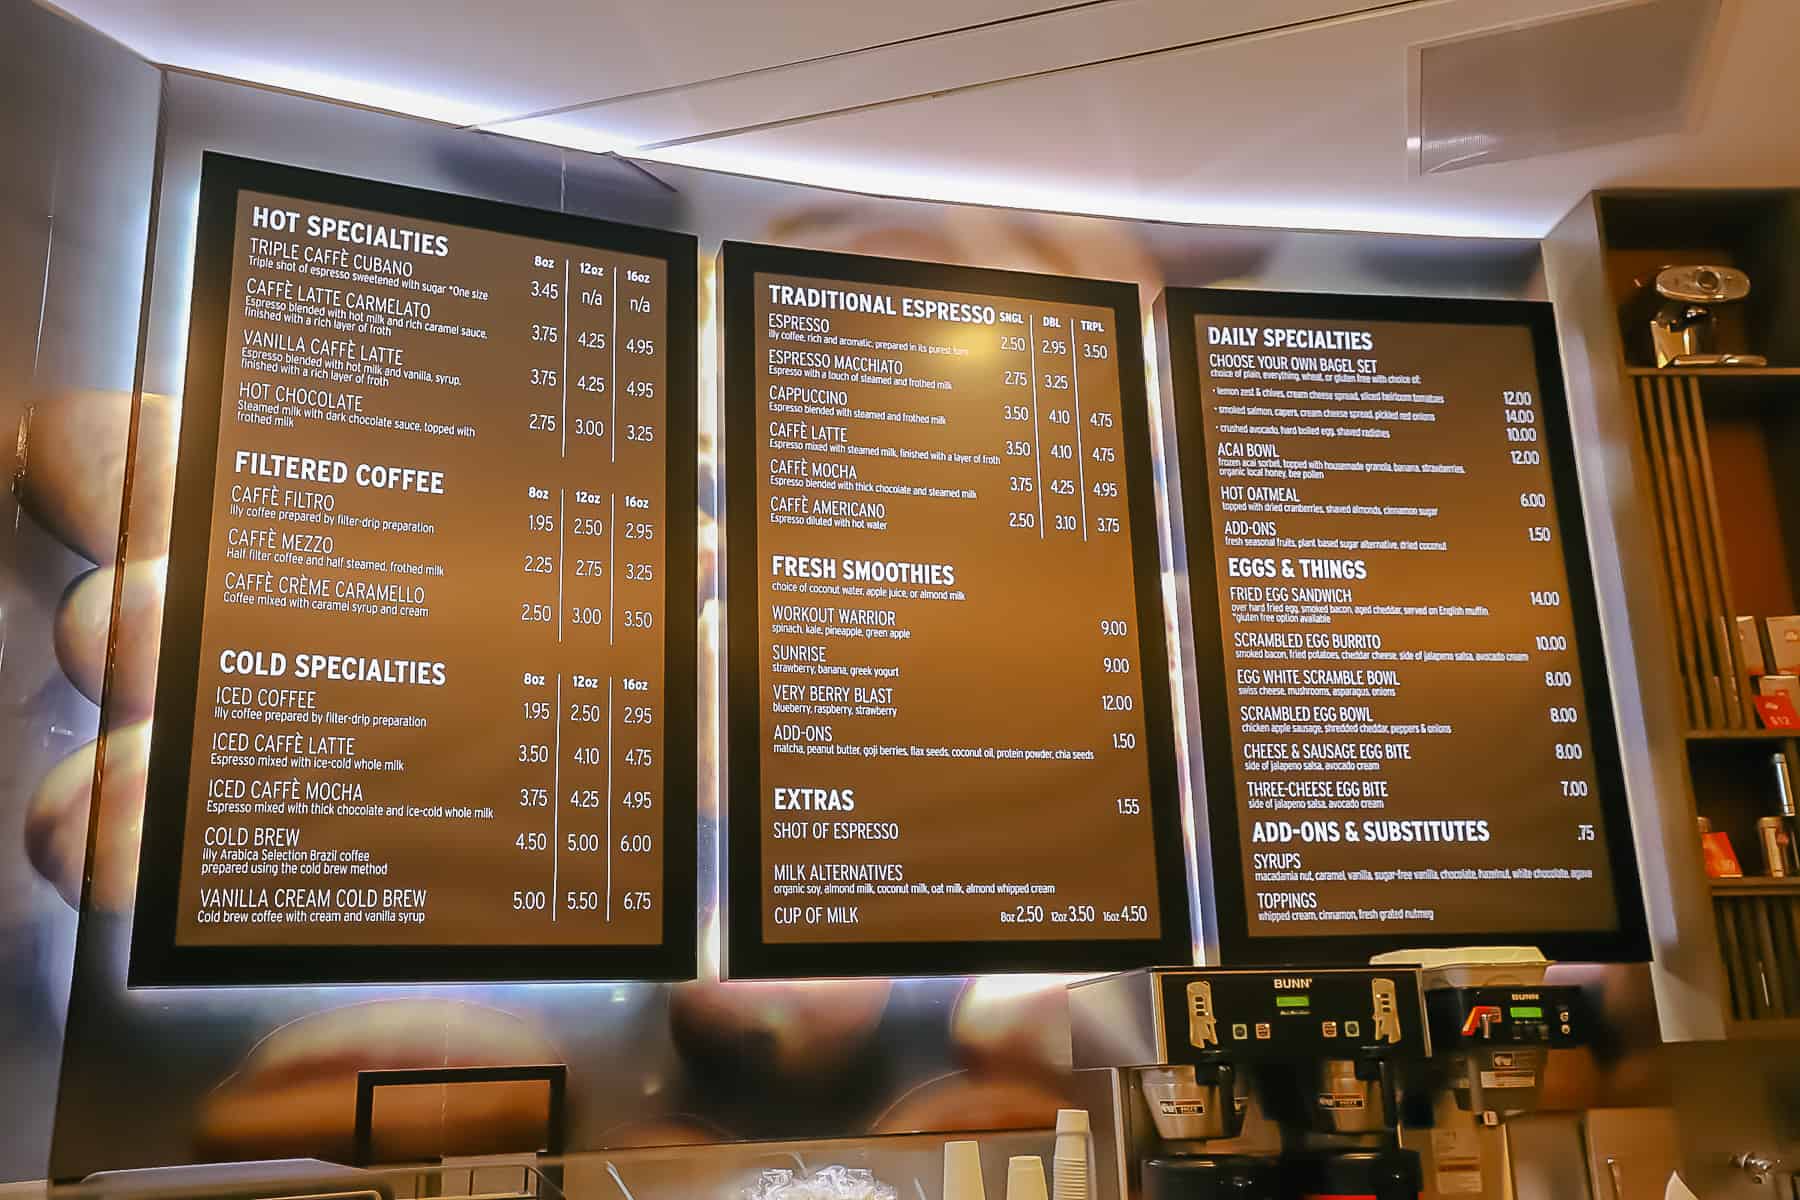 menu showing various coffee and other offerings 